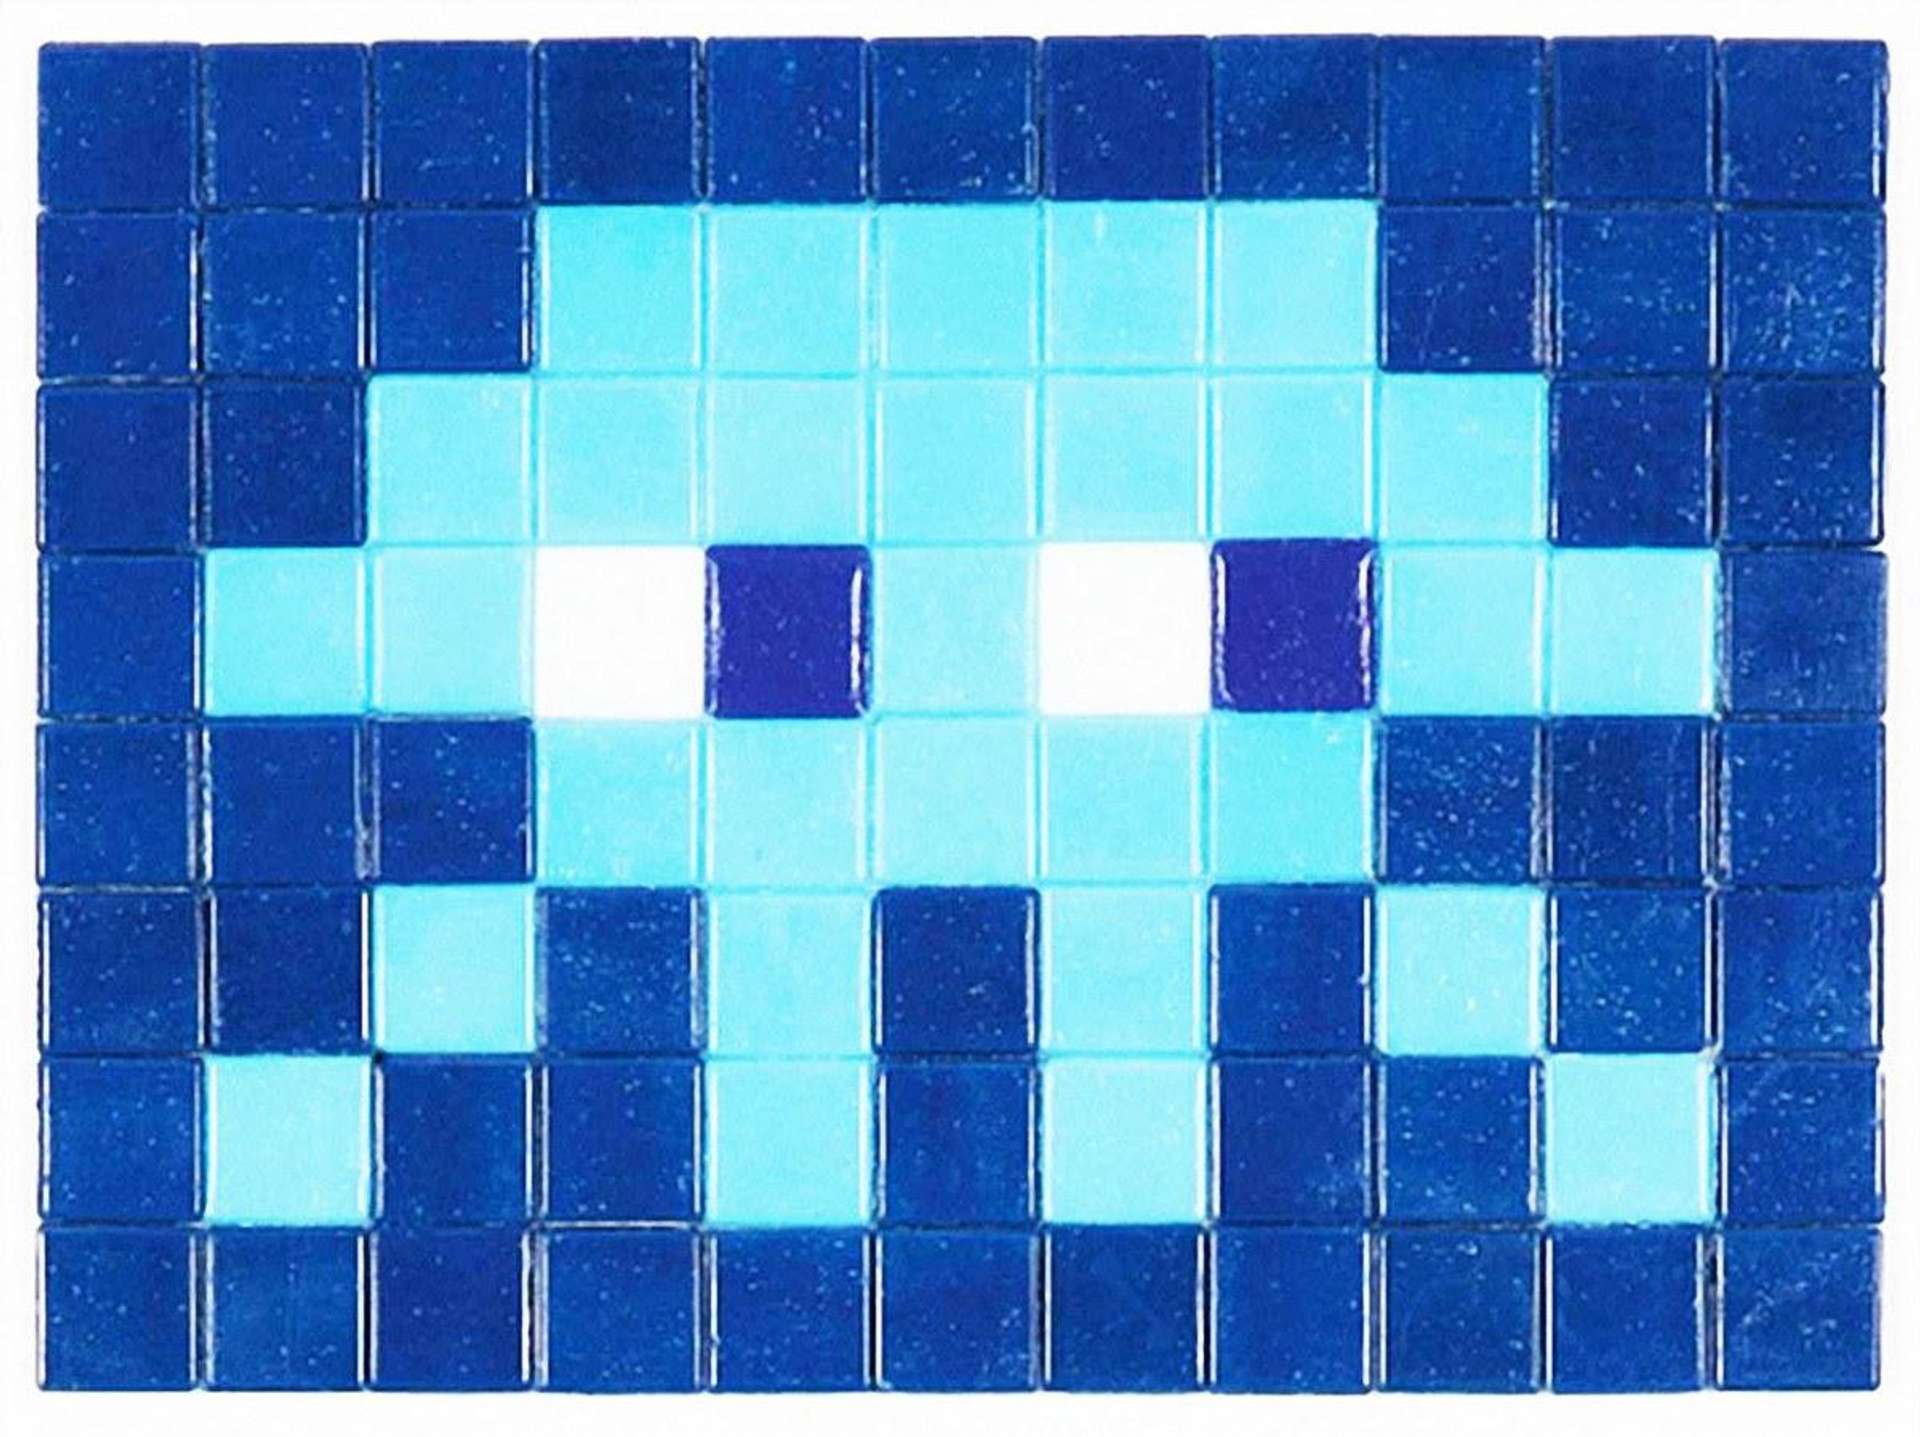 A mosaic of blue tiles by Invader depicting a Space Invader character.